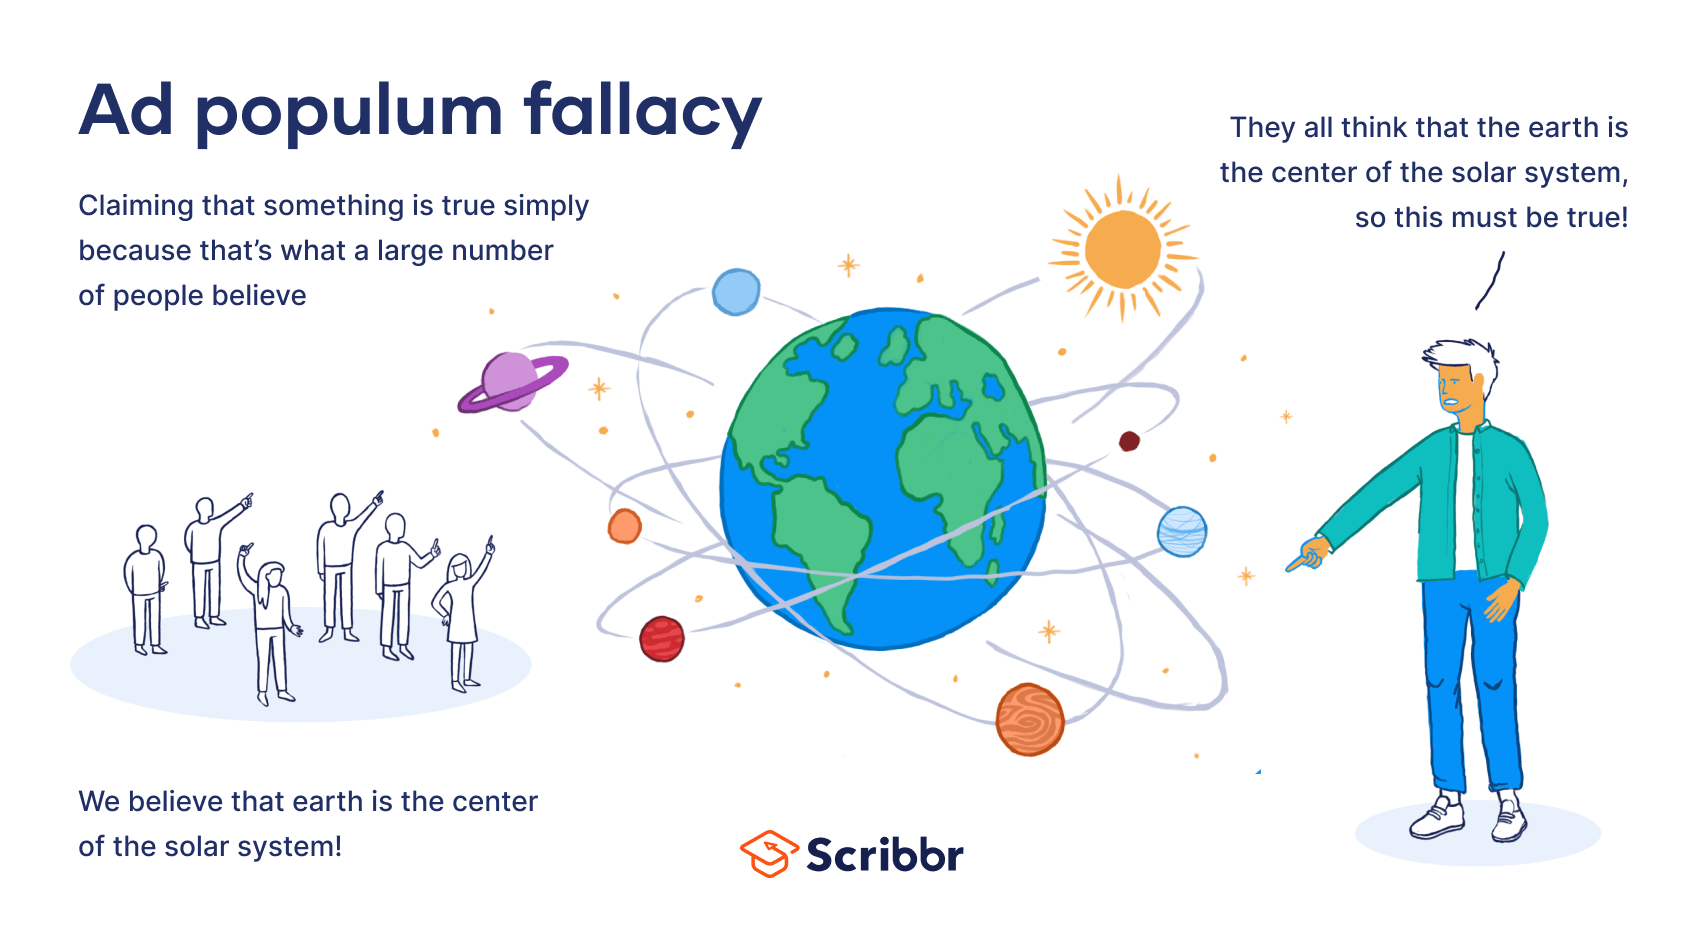 What Is Ad Populum Fallacy?